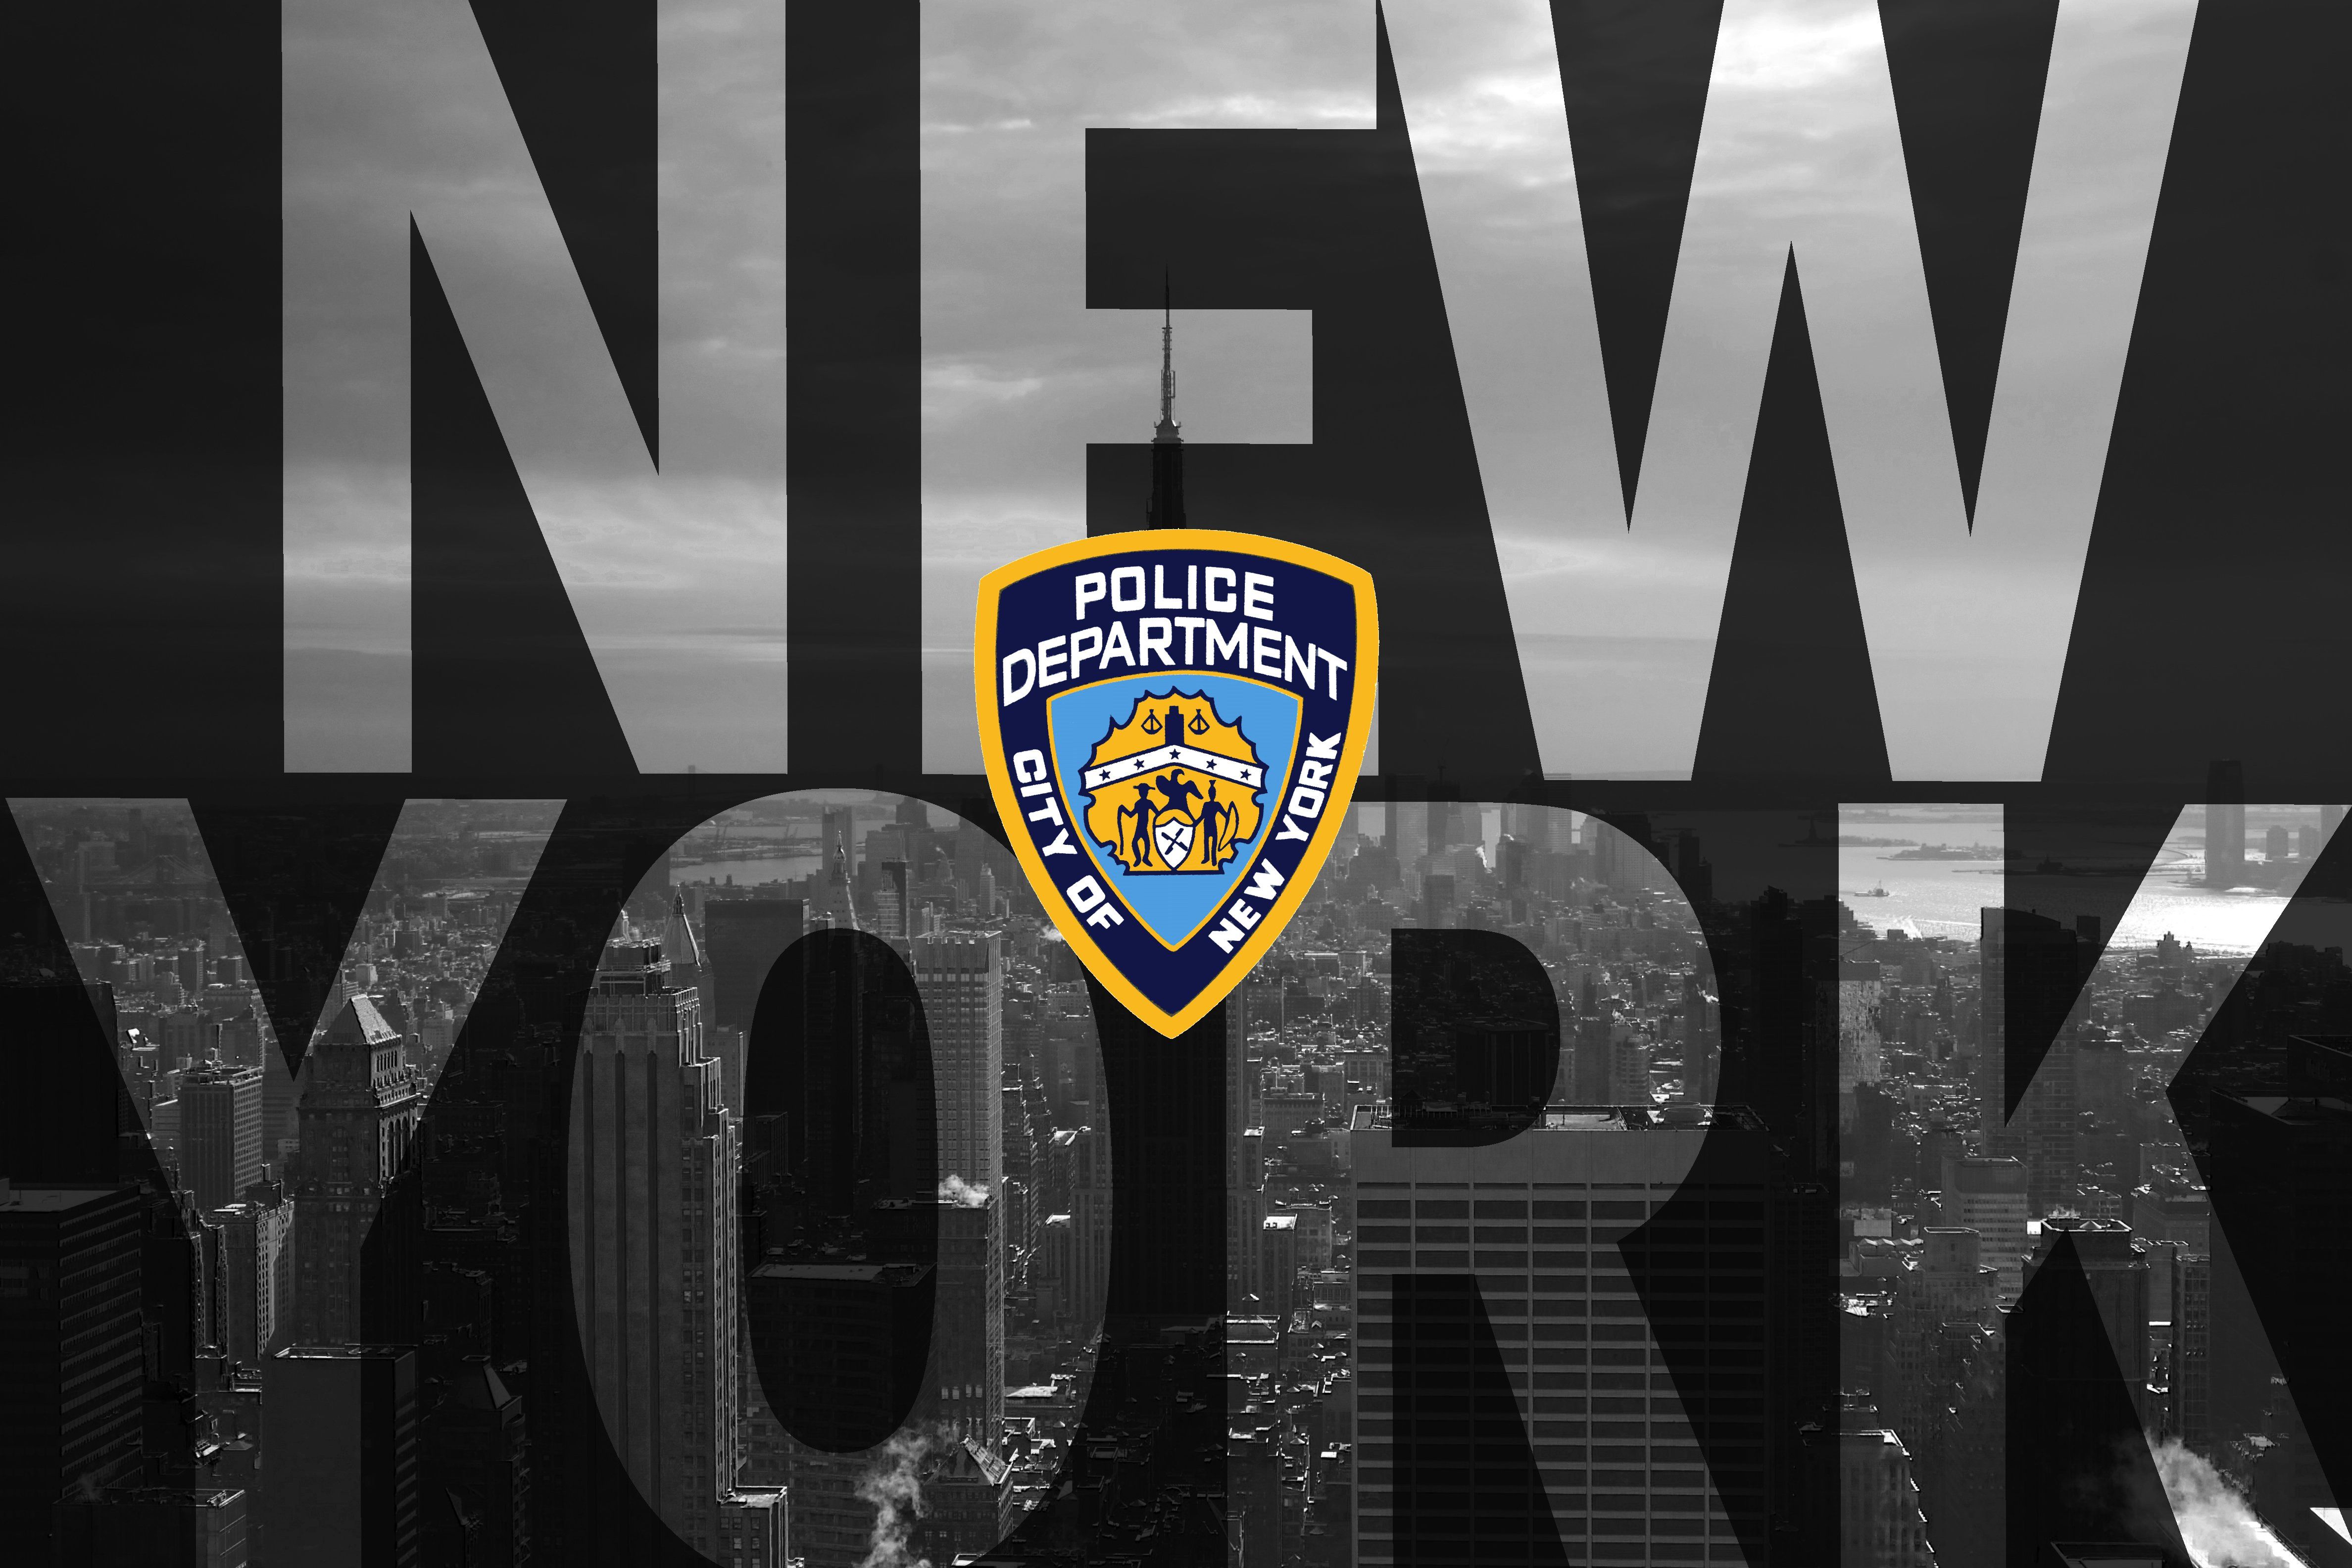 NYPD Wallpaper. NYPD Wallpaper, NYPD 3840 X 2160 Wallpaper and NYPD Blue Wallpaper